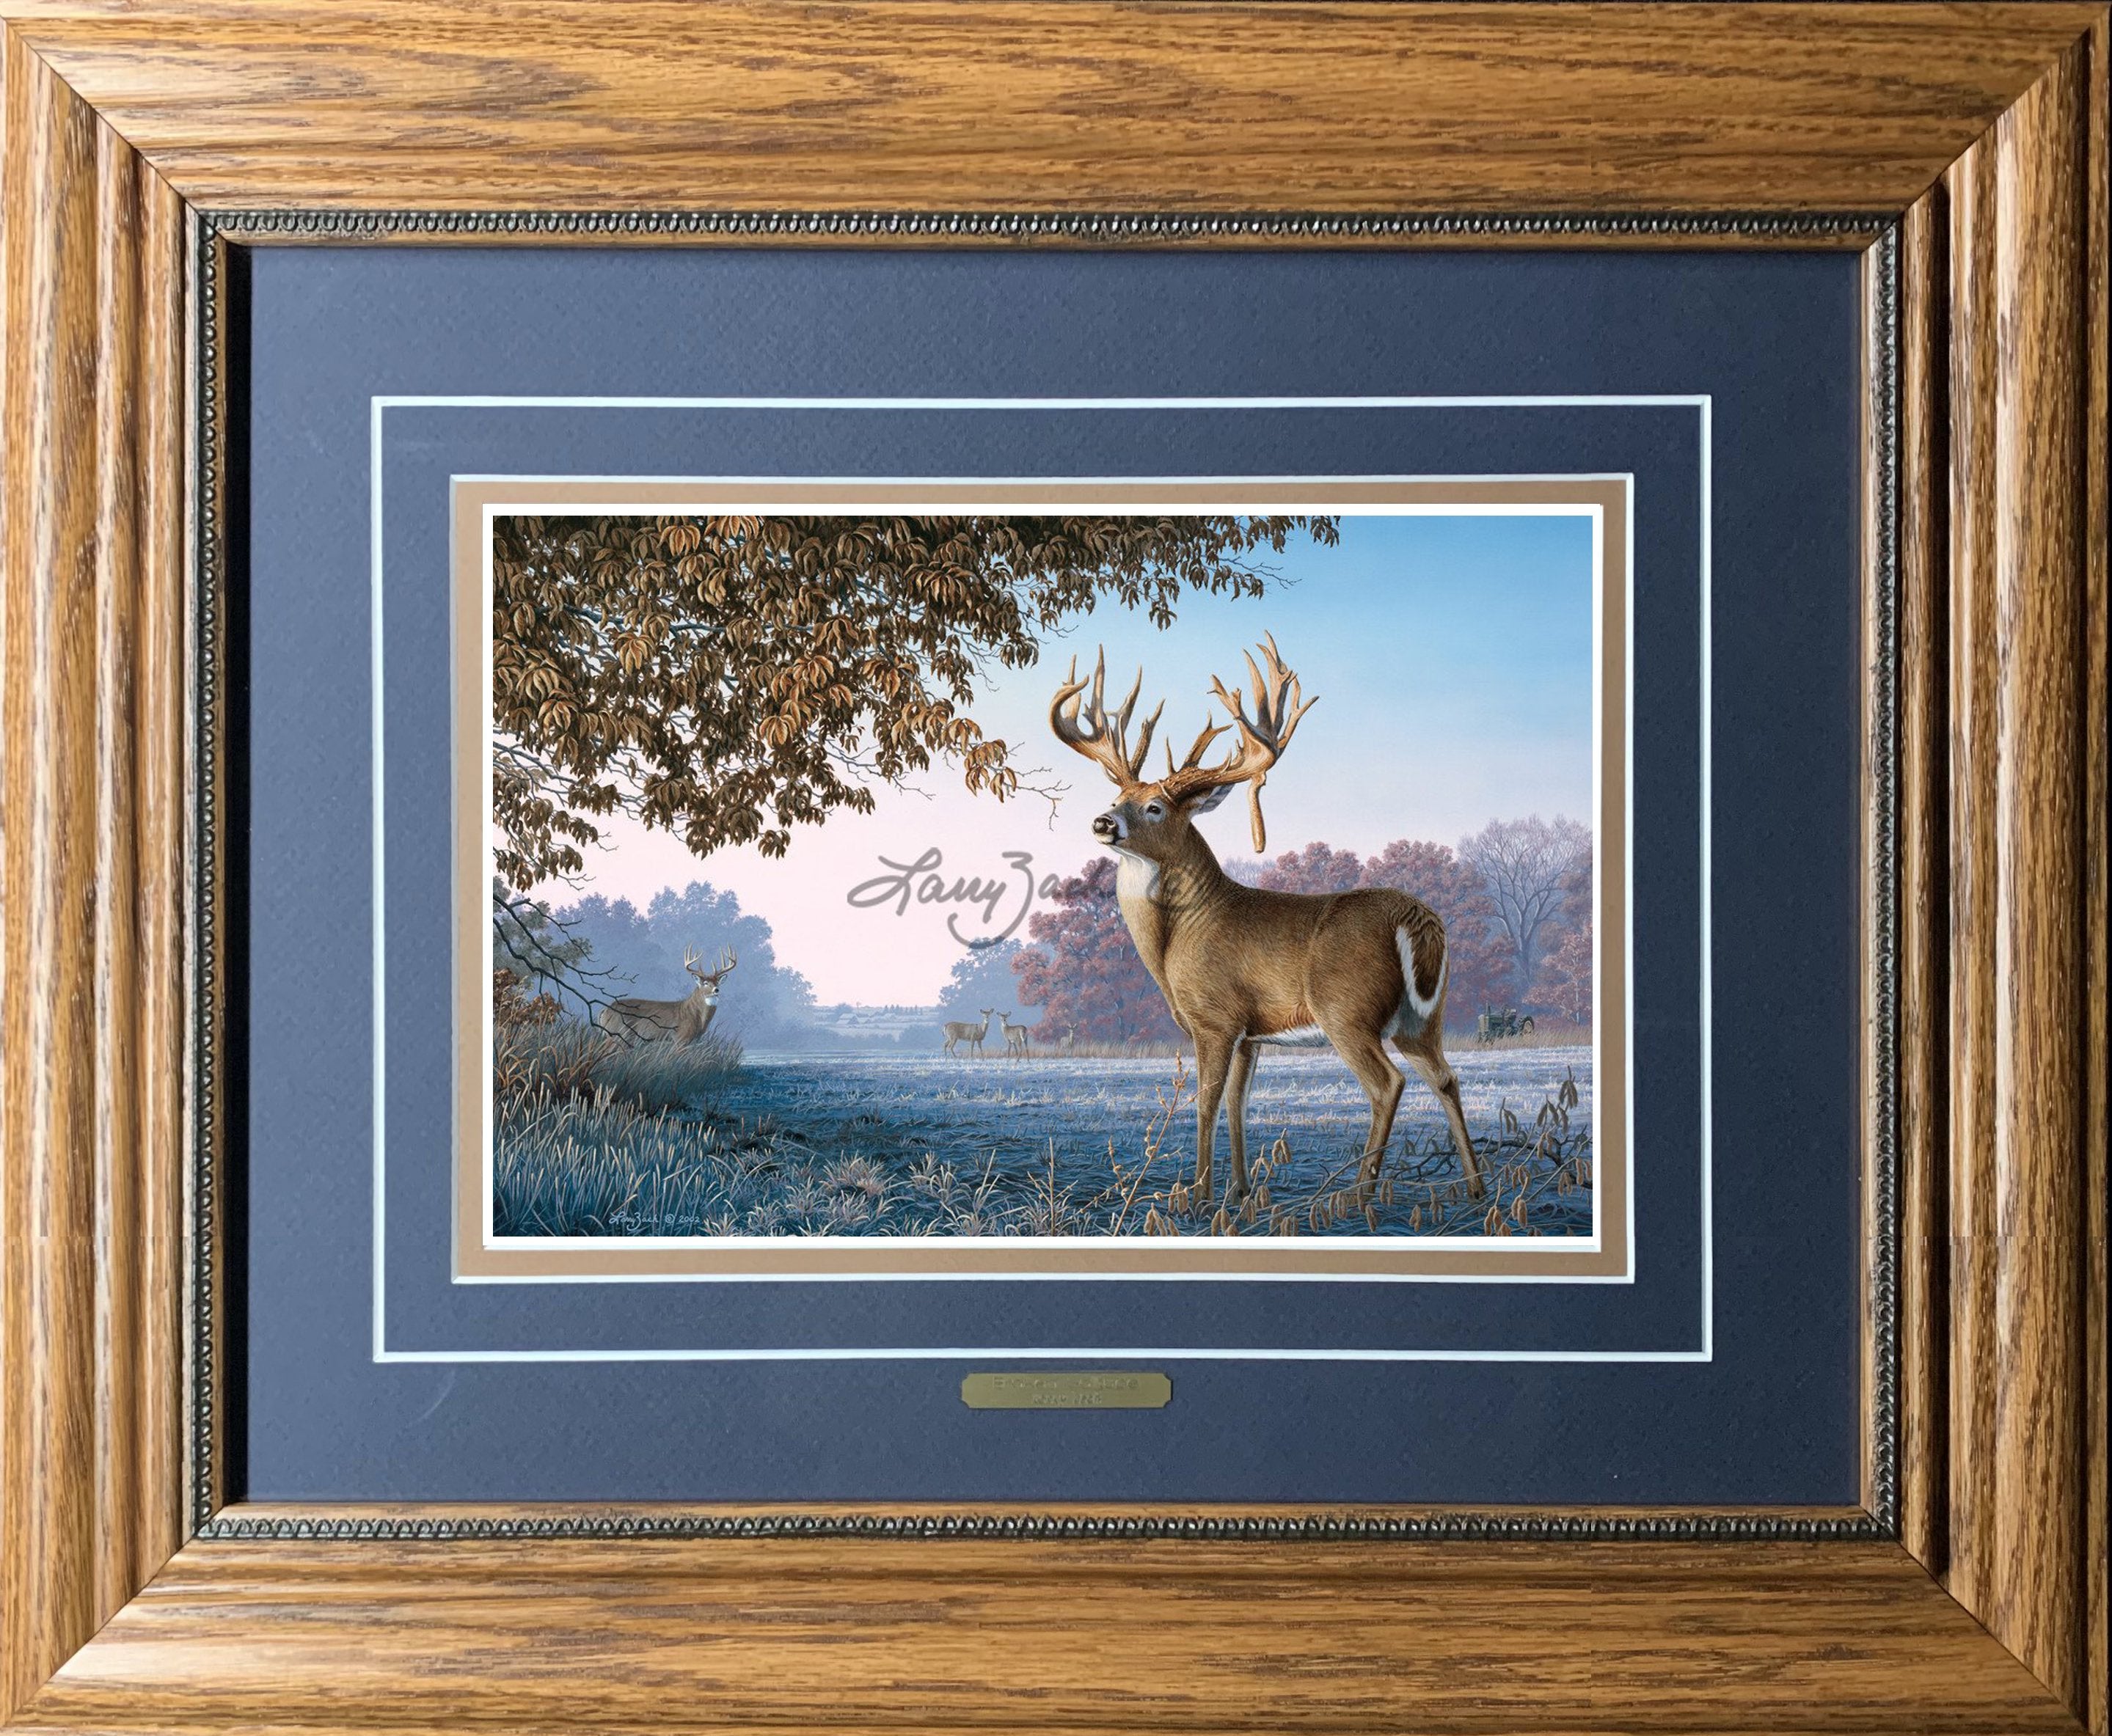 Open Edition Encore/Decorator Paper Framing Navy Combo